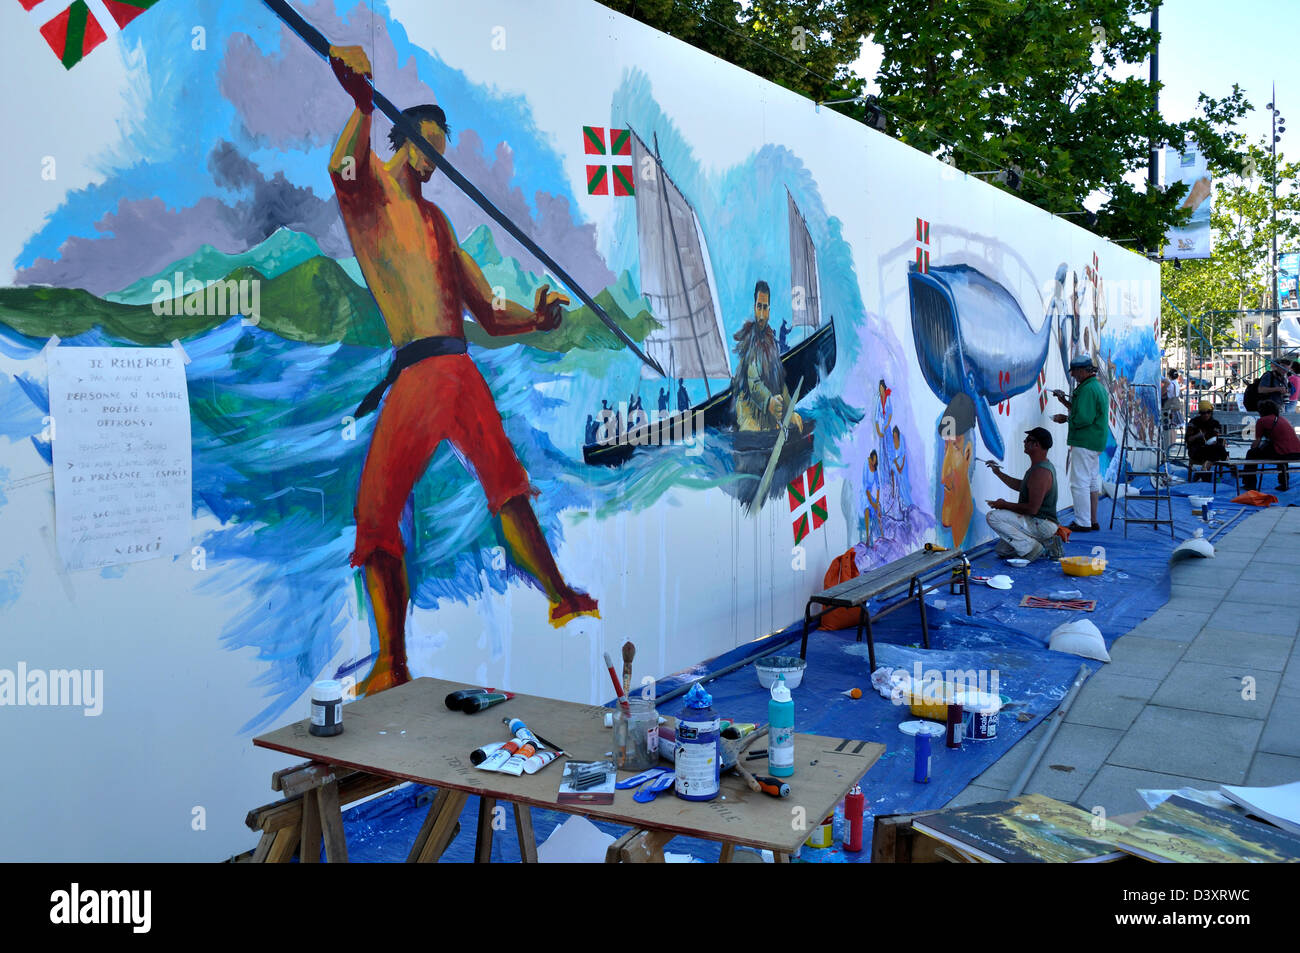 Painters Yvon le Corre, Gildas Flahault and Gaele Flao settled on Vannes quays for the event ('Semaine du Golfe' 2011). Stock Photo